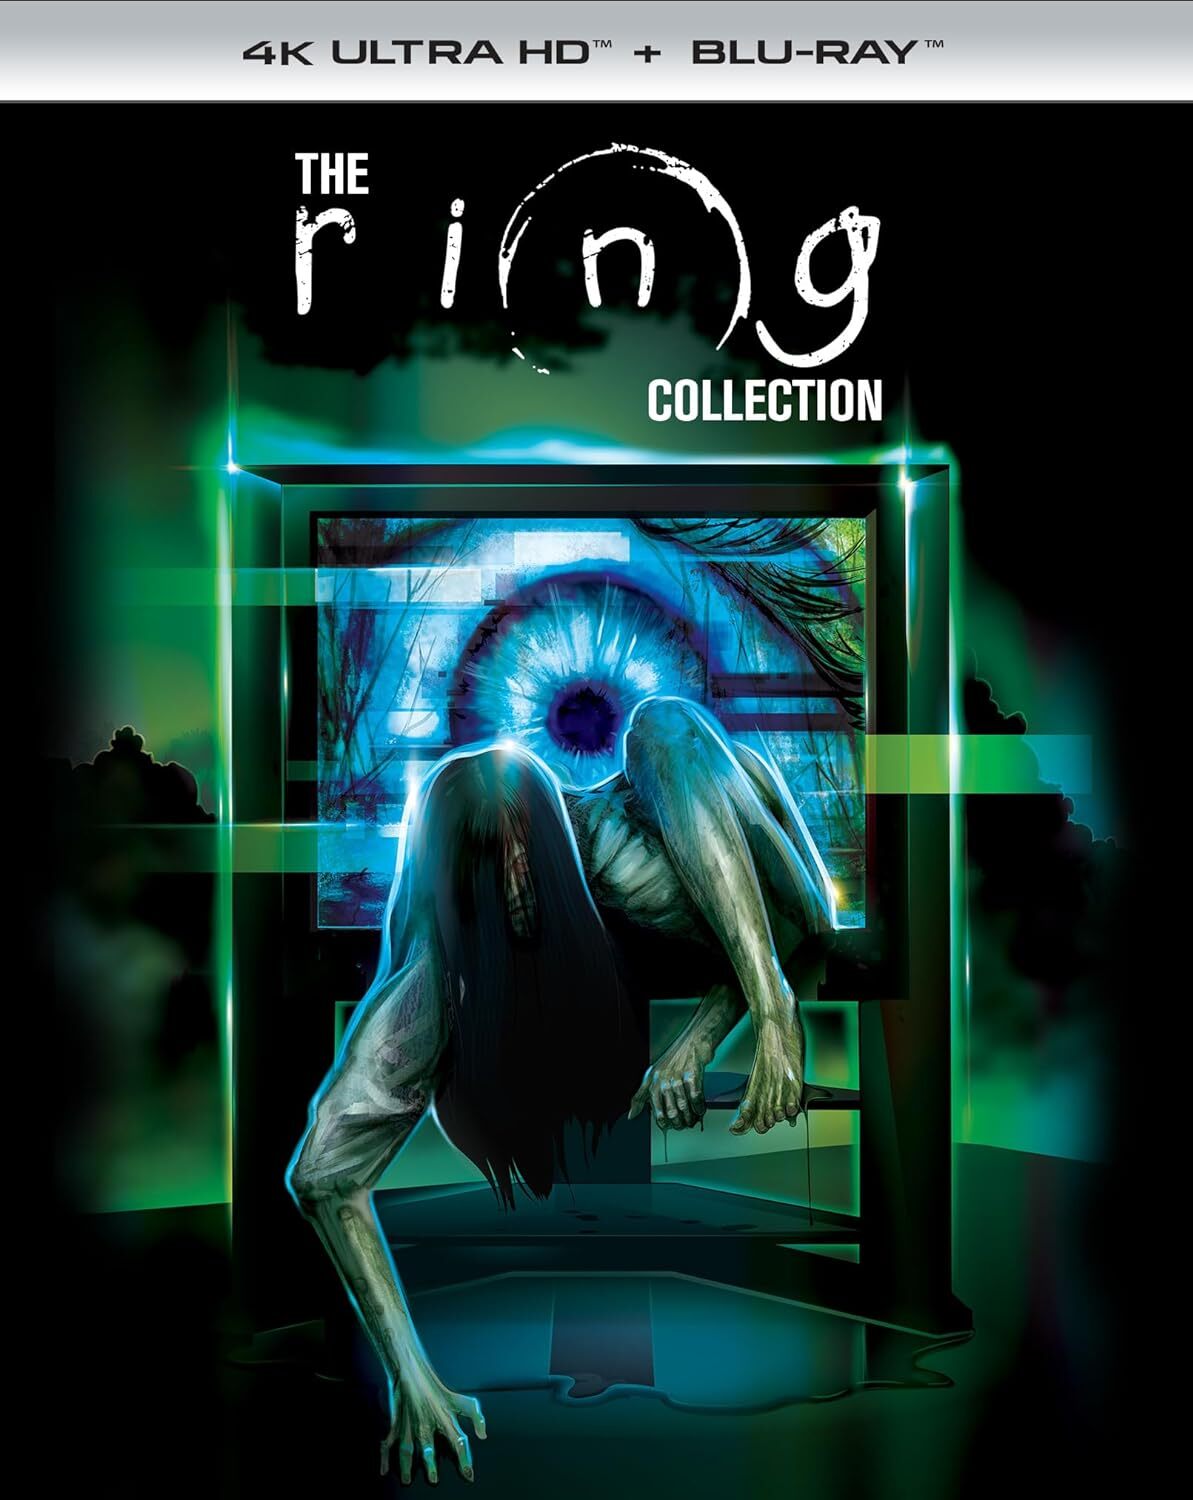 THE RING COLLECTION 4K UHD/BLU-RAY